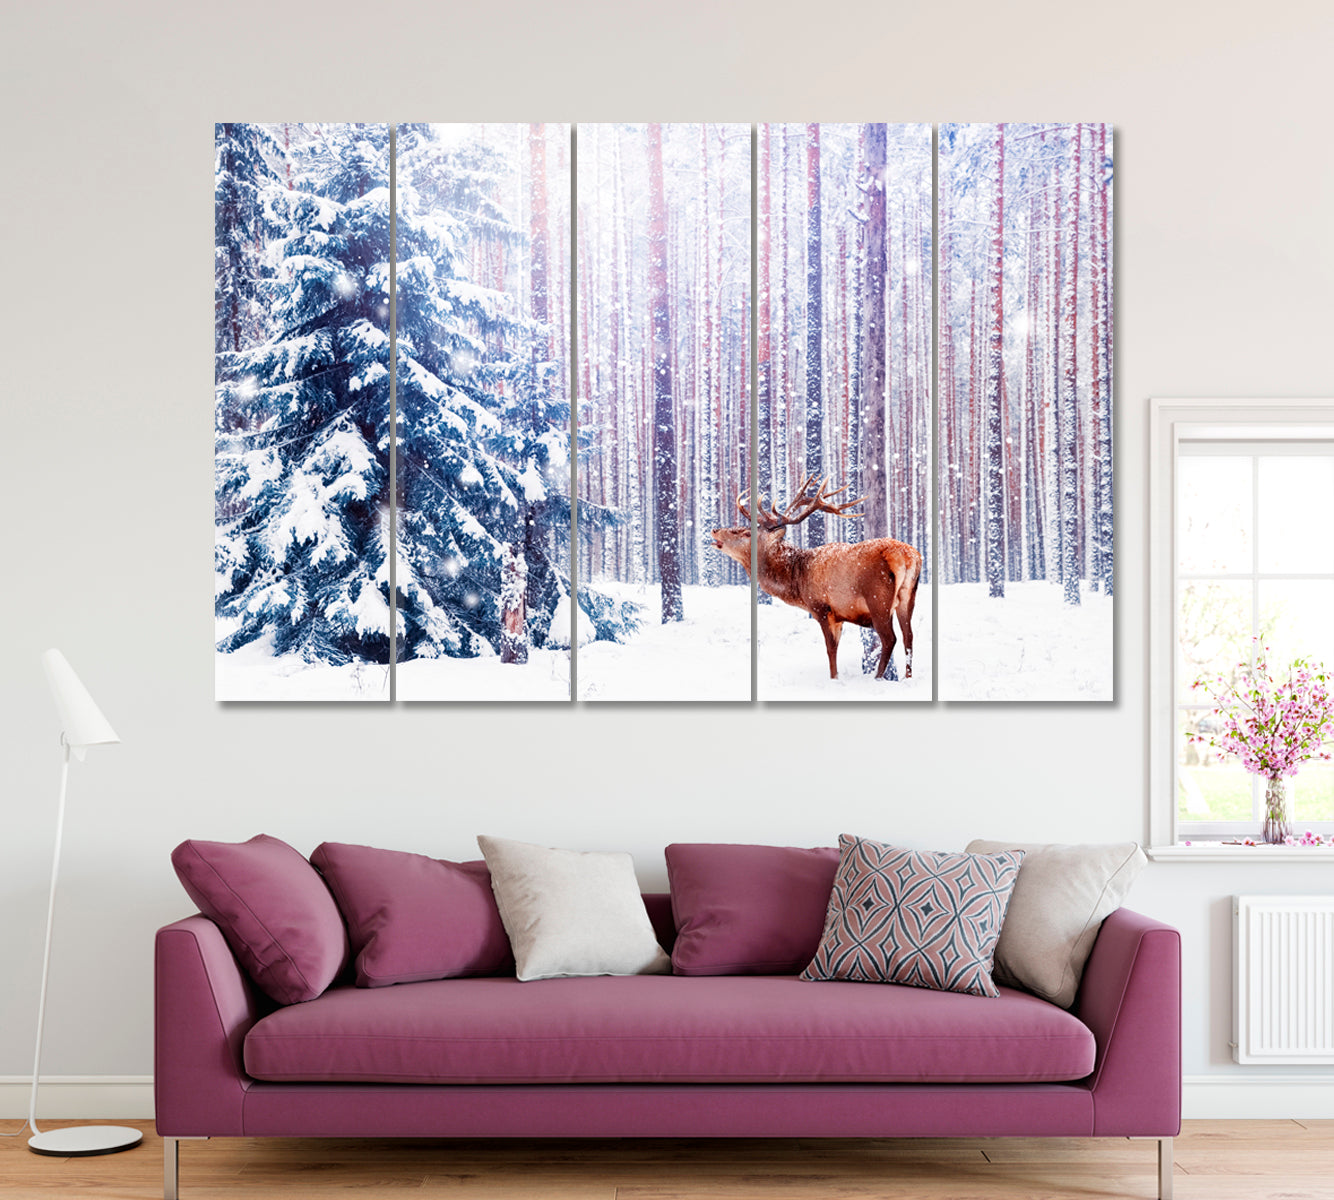 Noble Deer in Winter Forest Canvas Print ArtLexy 5 Panels 36"x24" inches 